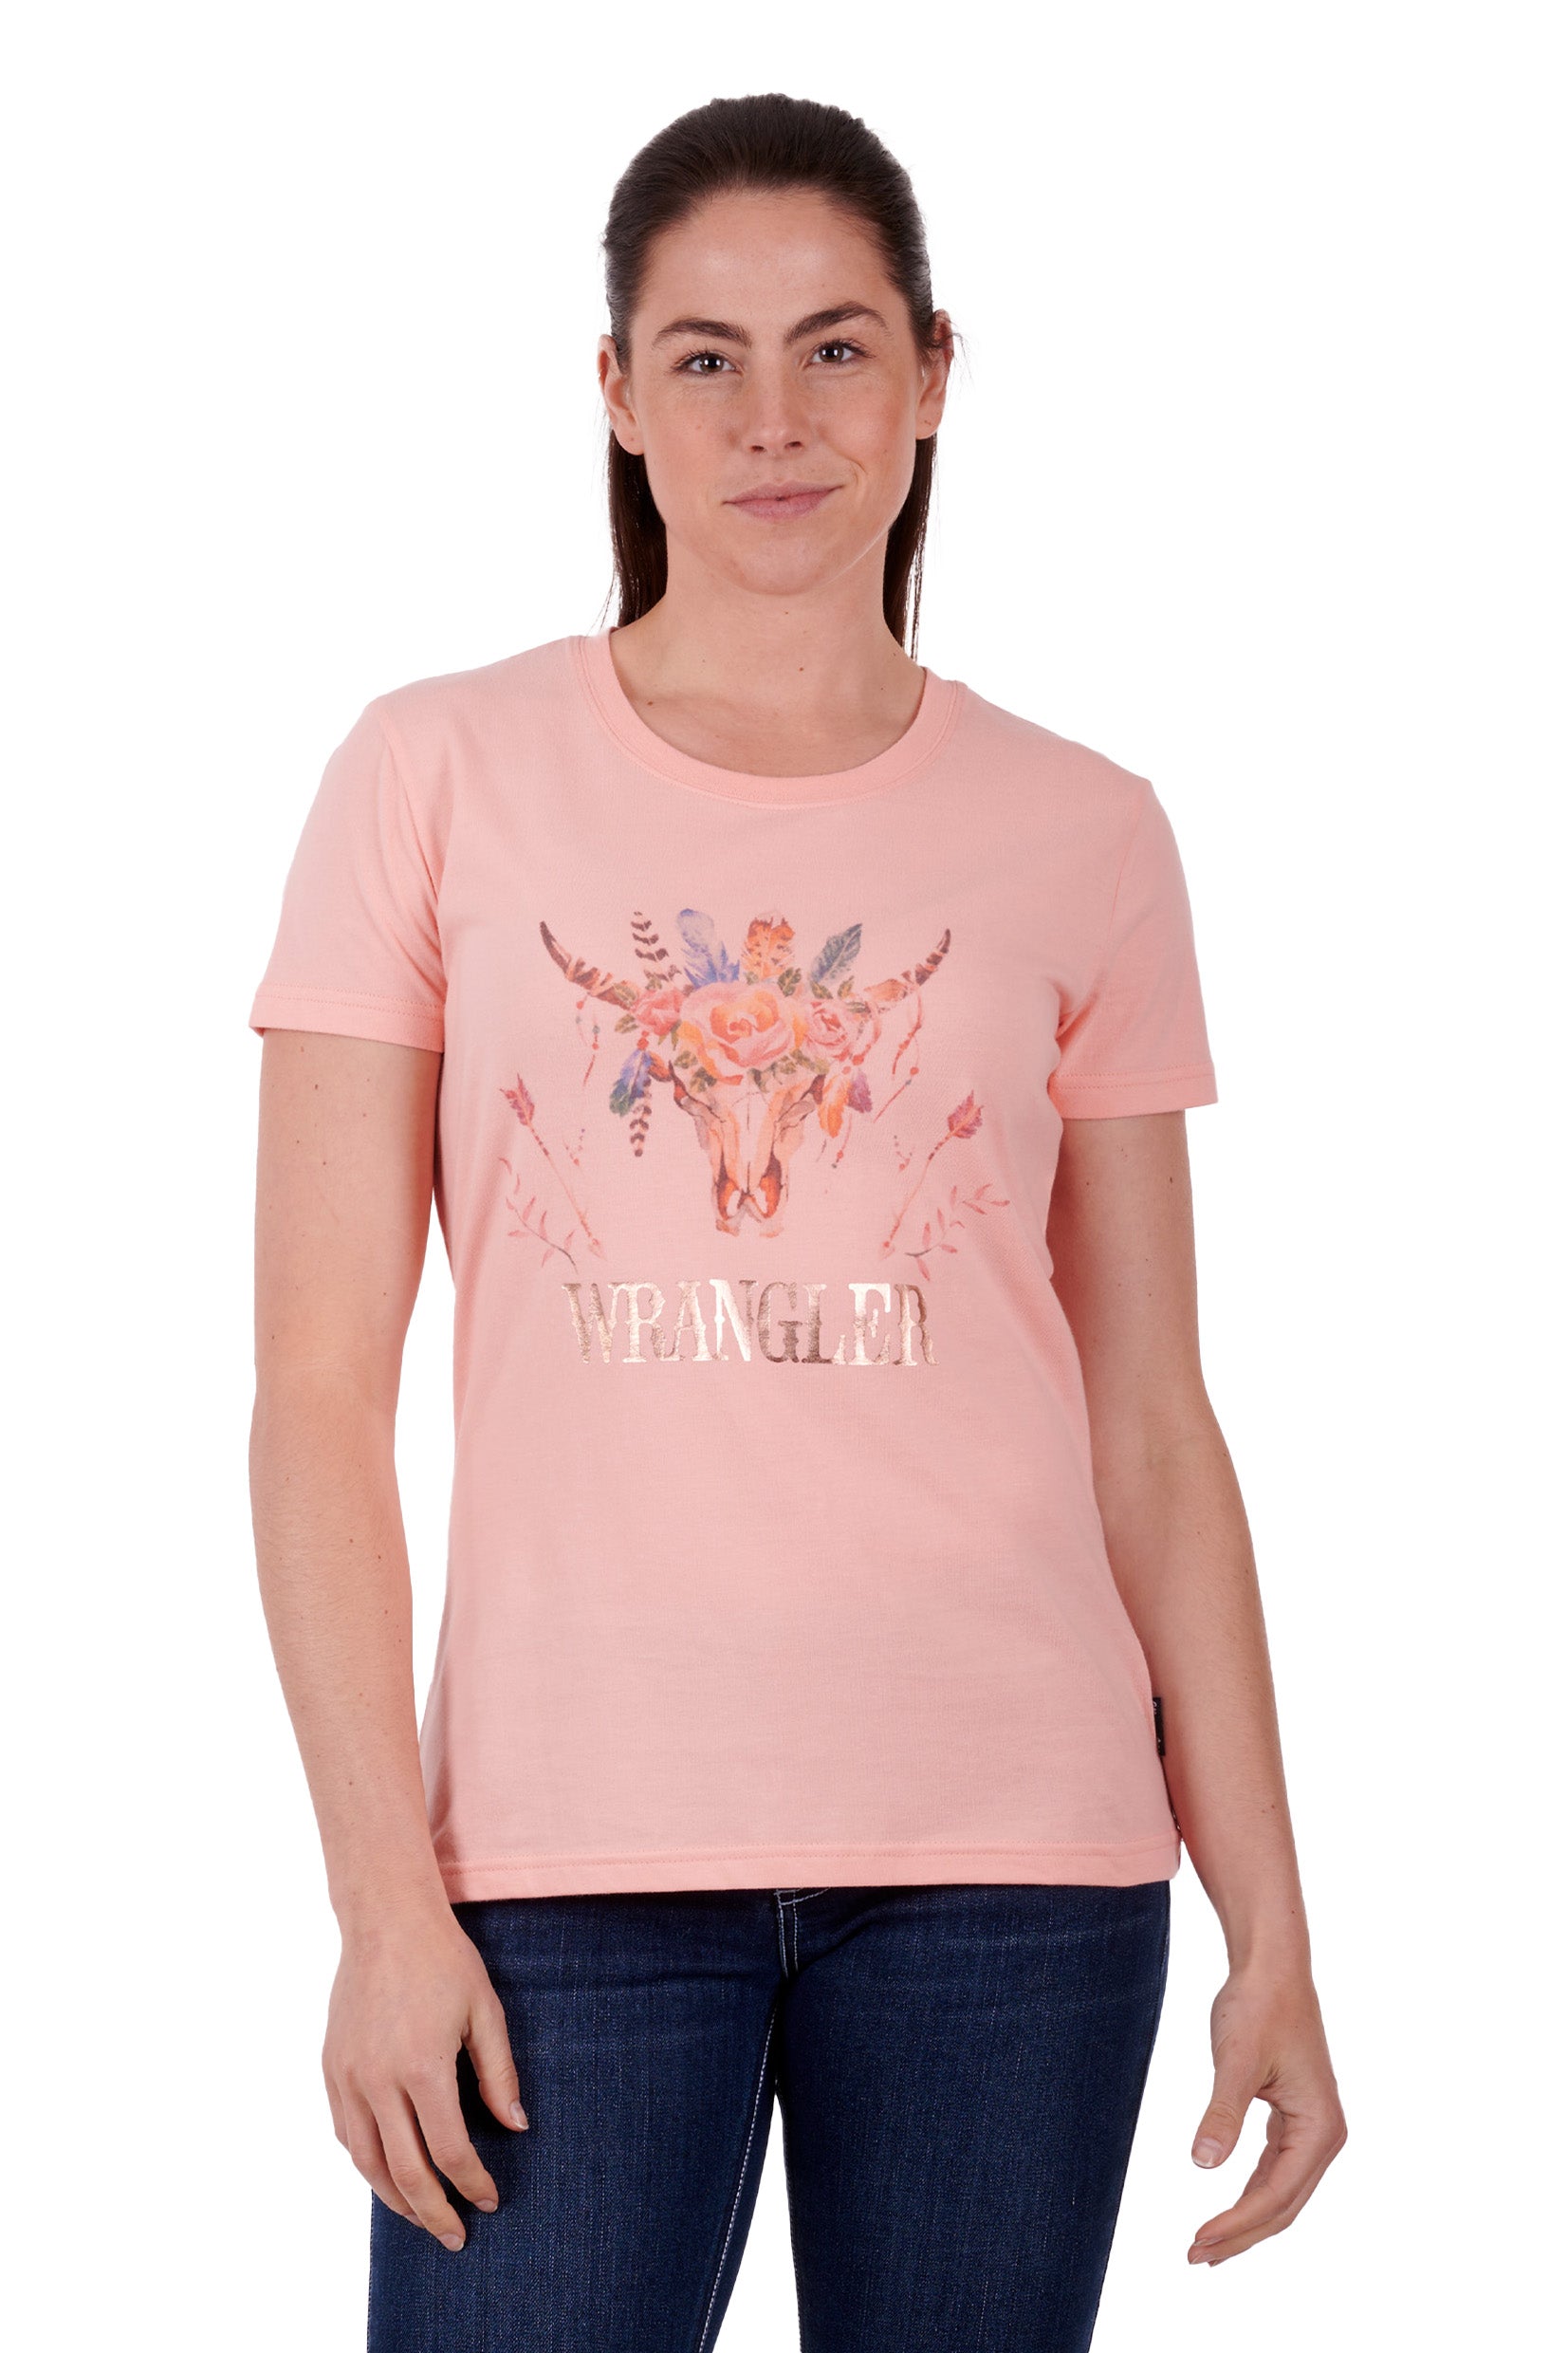 Wrangler Wmns Paige SS Tee - Summer Clearance